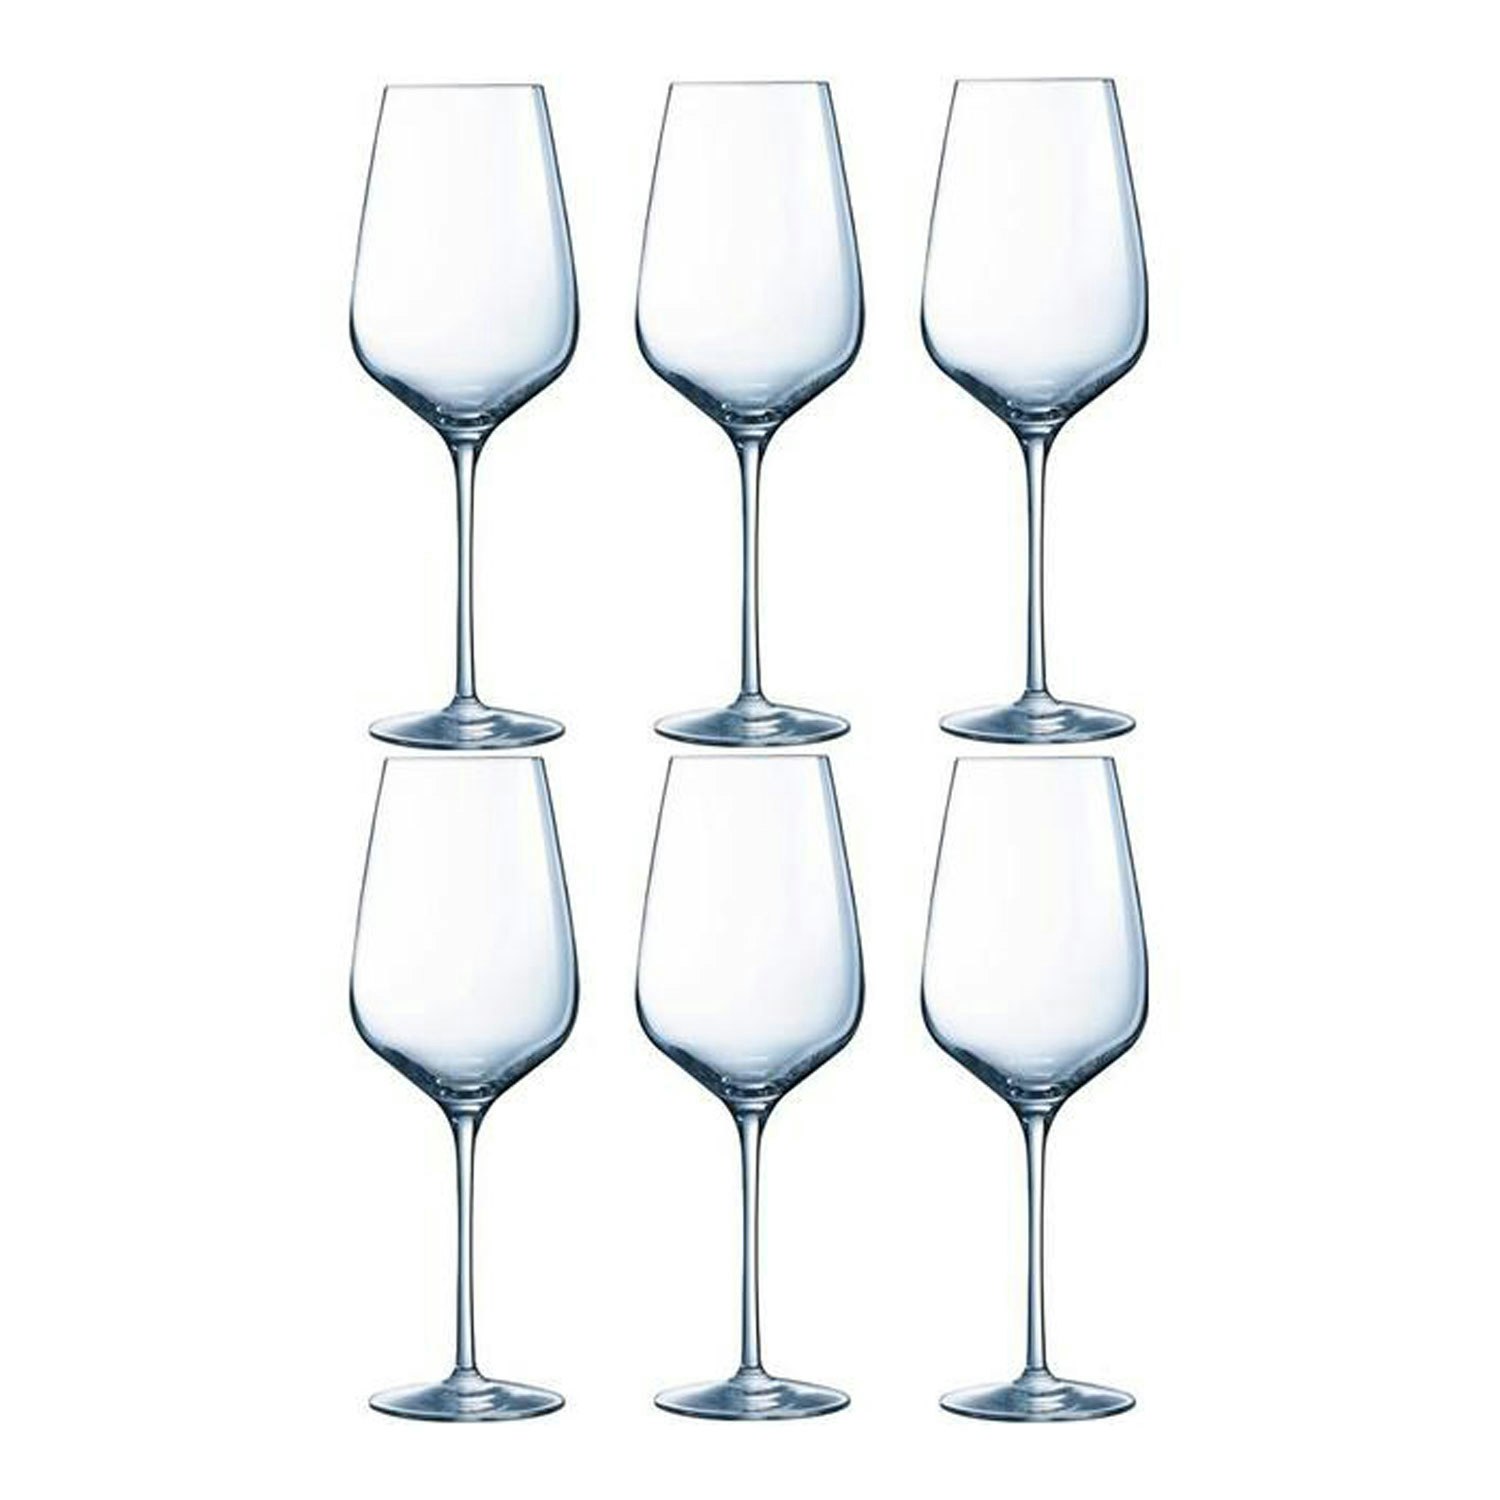 https://royaldesign.com/image/10/chefsommelier-sublym-red-wine-glass-55-cl-6-pack-0